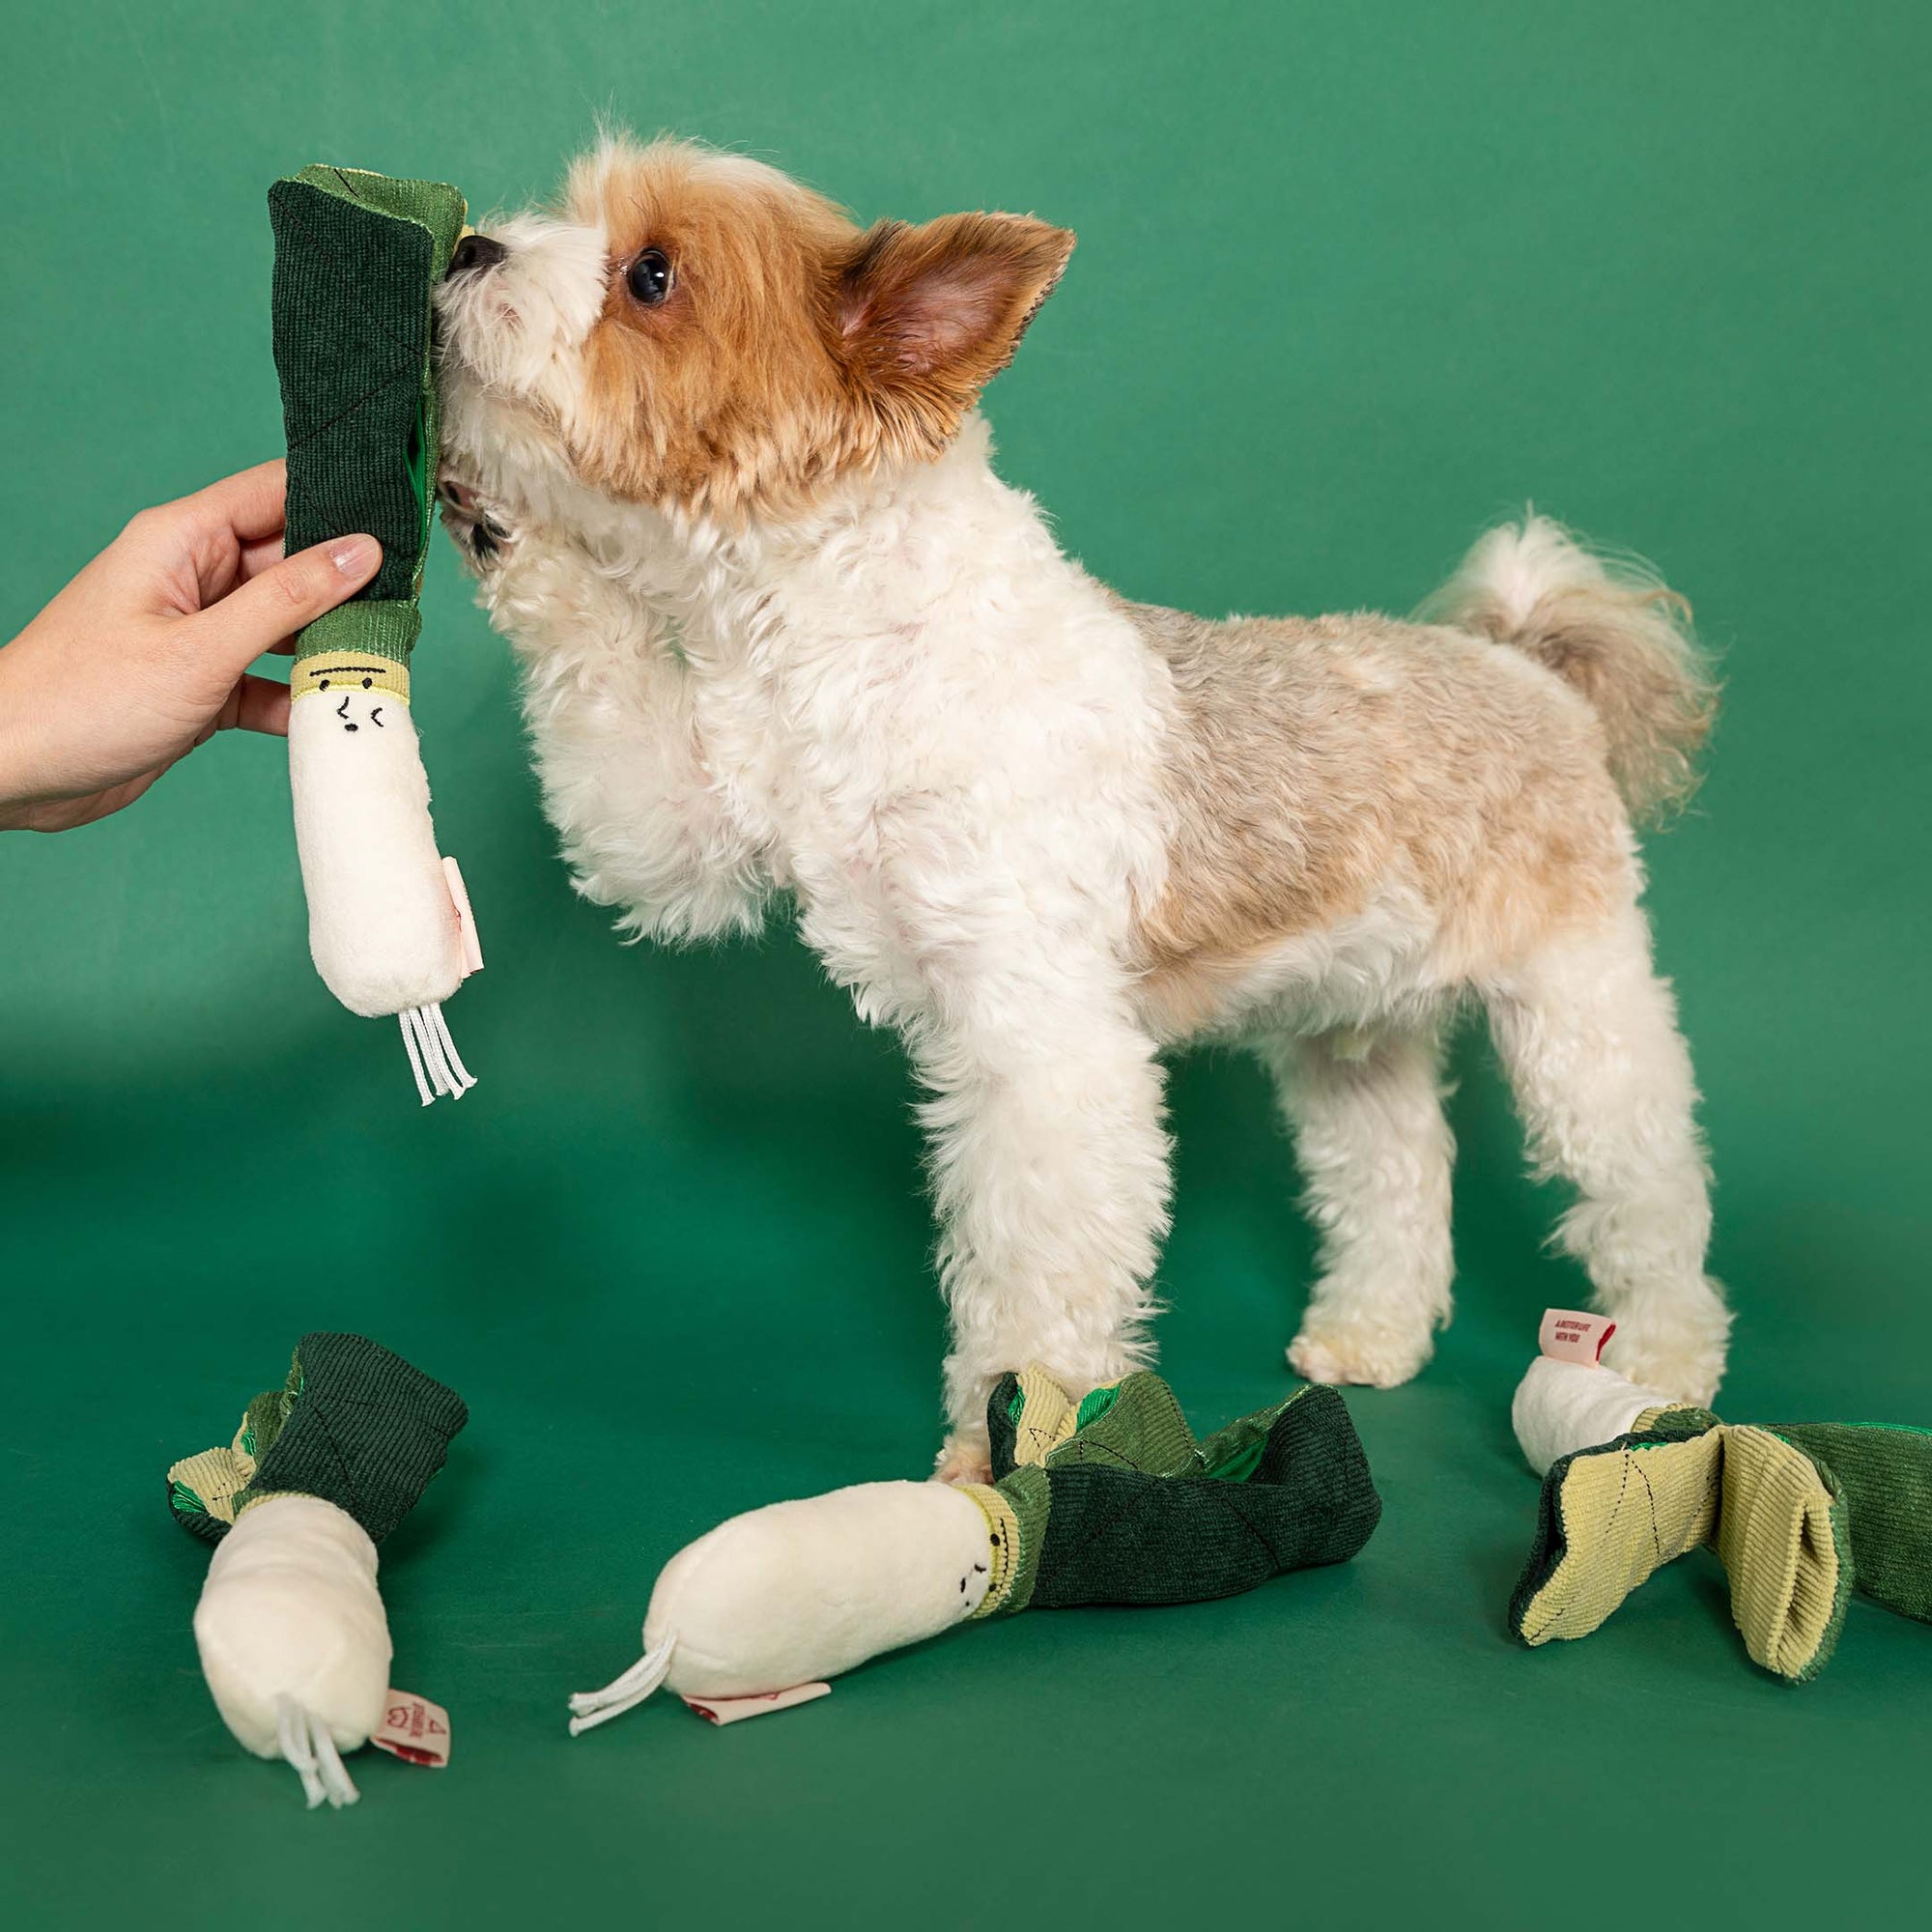 a fluffy white and tan dog on its hind legs, engaging with a green onion-shaped dog toy that a human hand is holding. The playful stance of the dog and its interaction with the toy suggest a lively and enjoyable playtime. Other similar toys are scattered on the green background, indicating a session of interactive play or training designed to stimulate the dog's senses and provide mental enrichment.